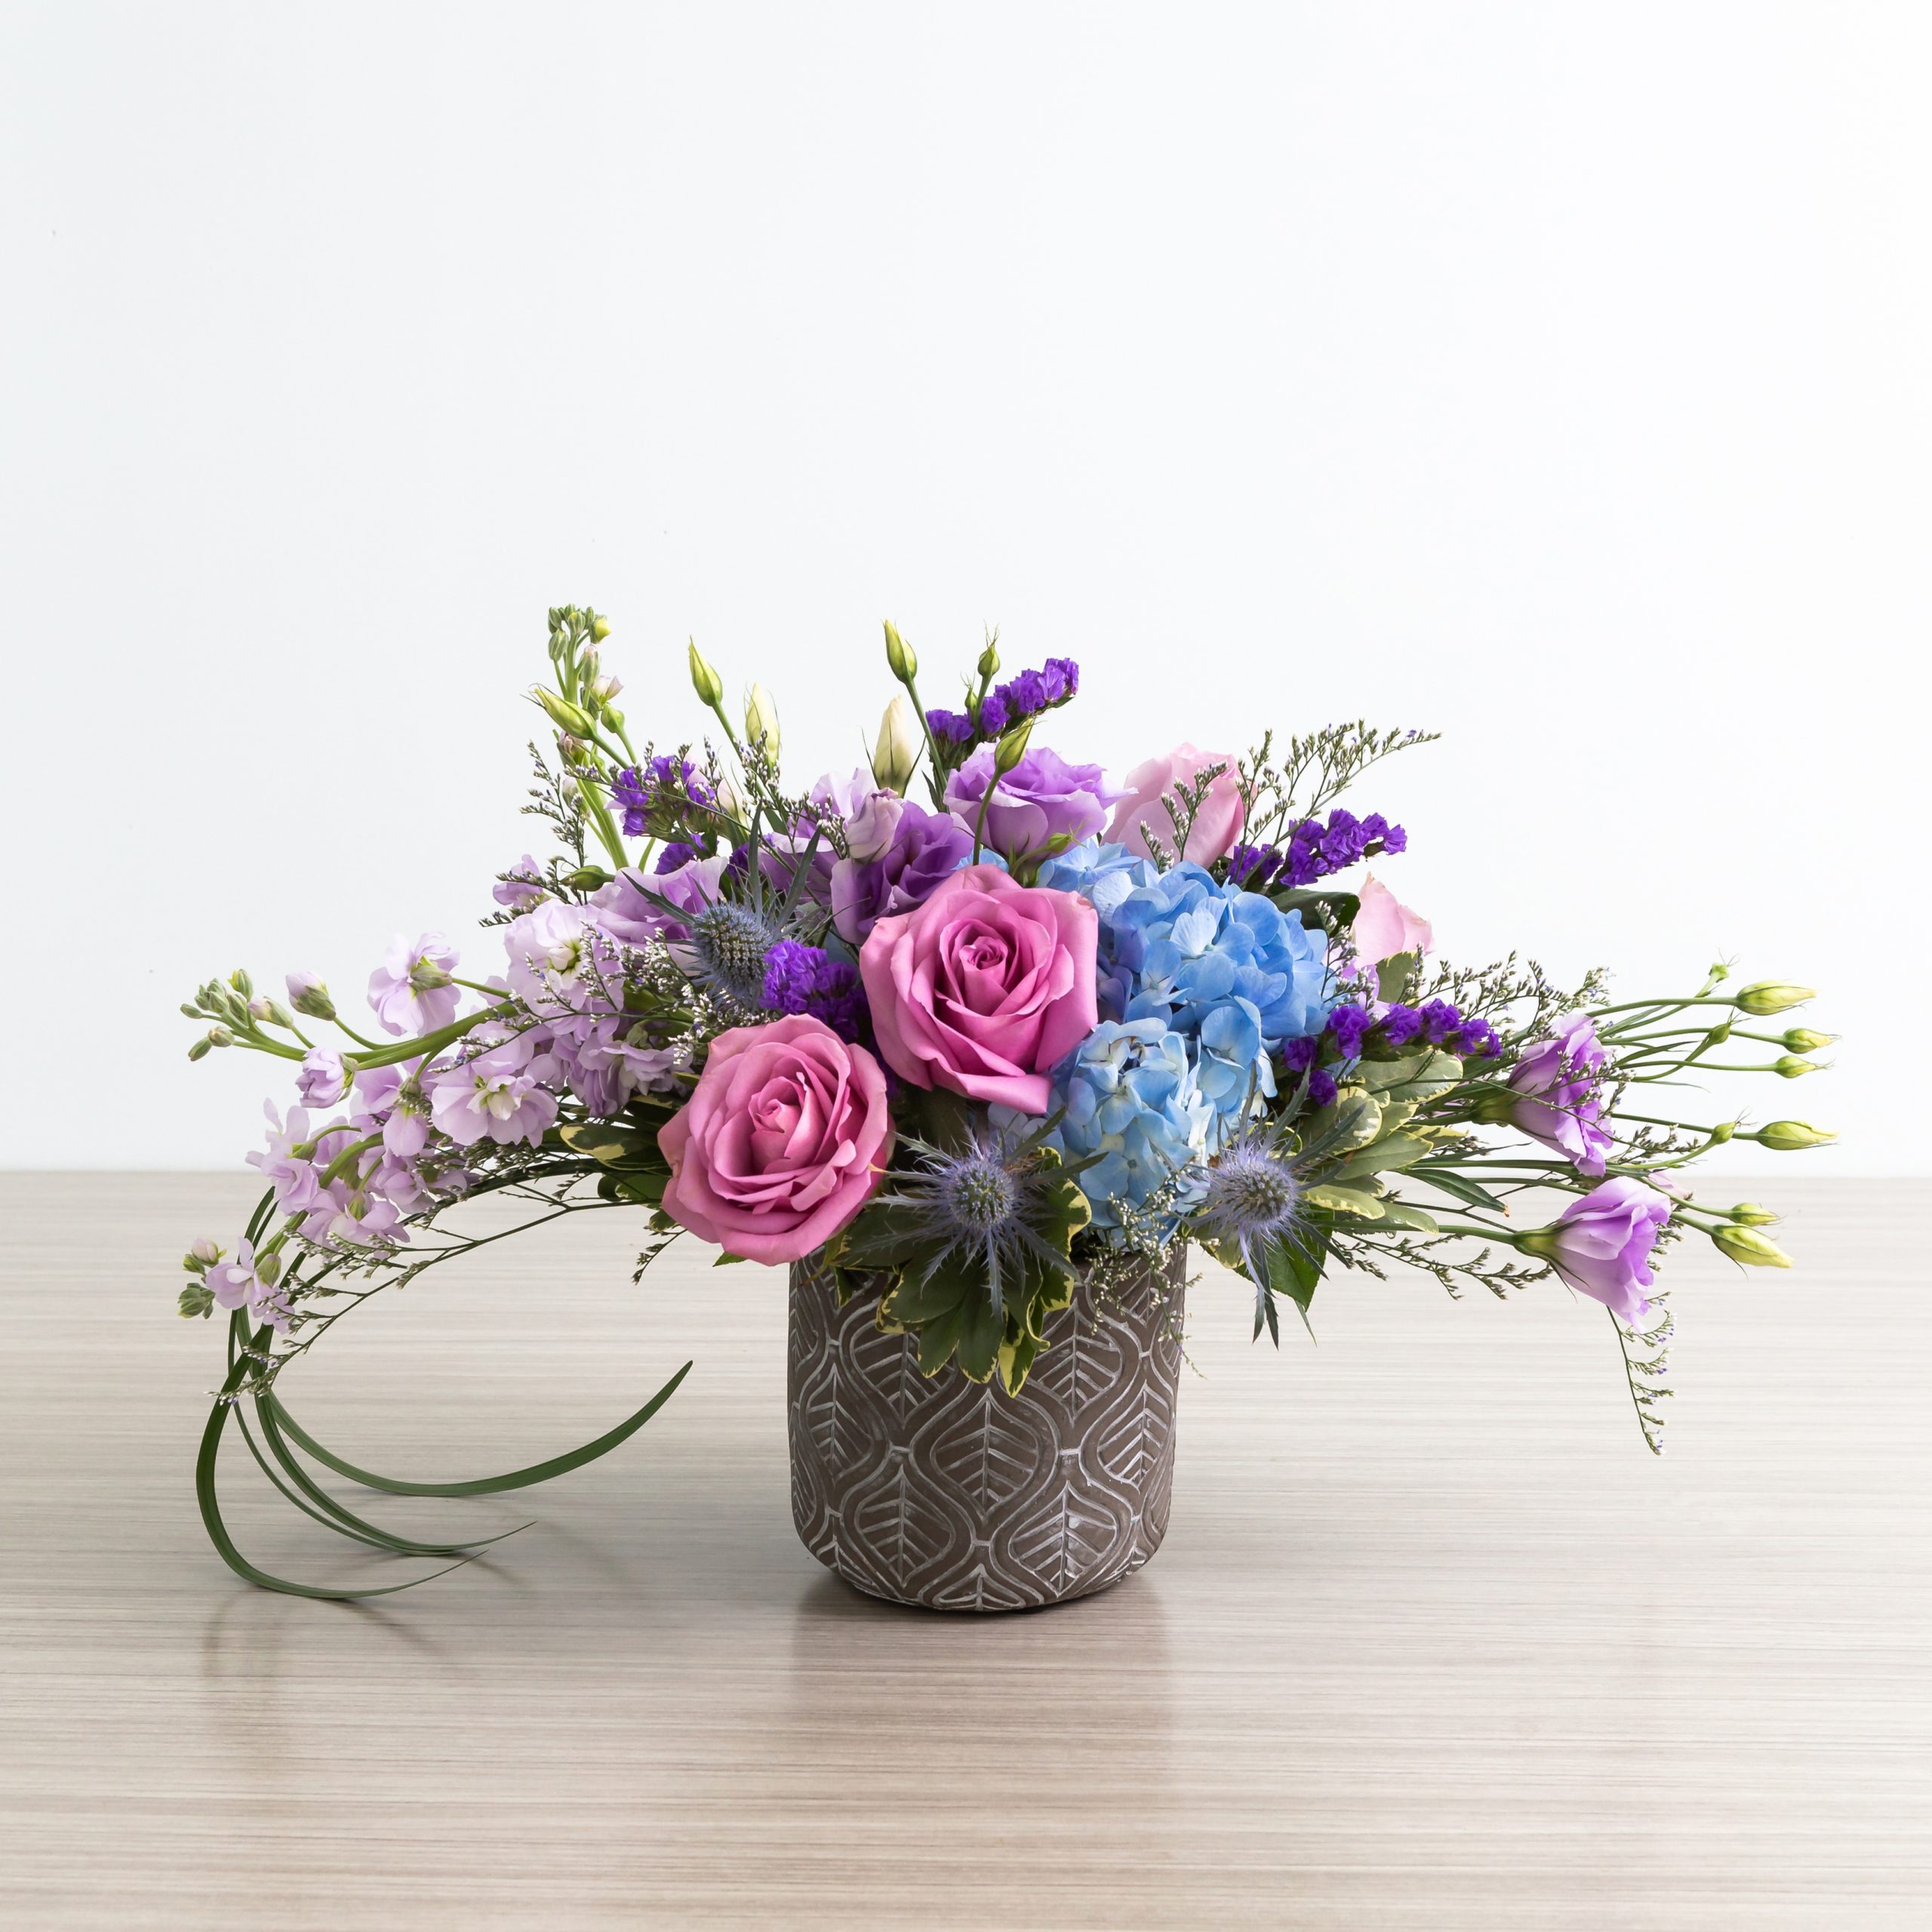 Floral arrangement with Blue dream roses and blue hydrangeas and lisianthus